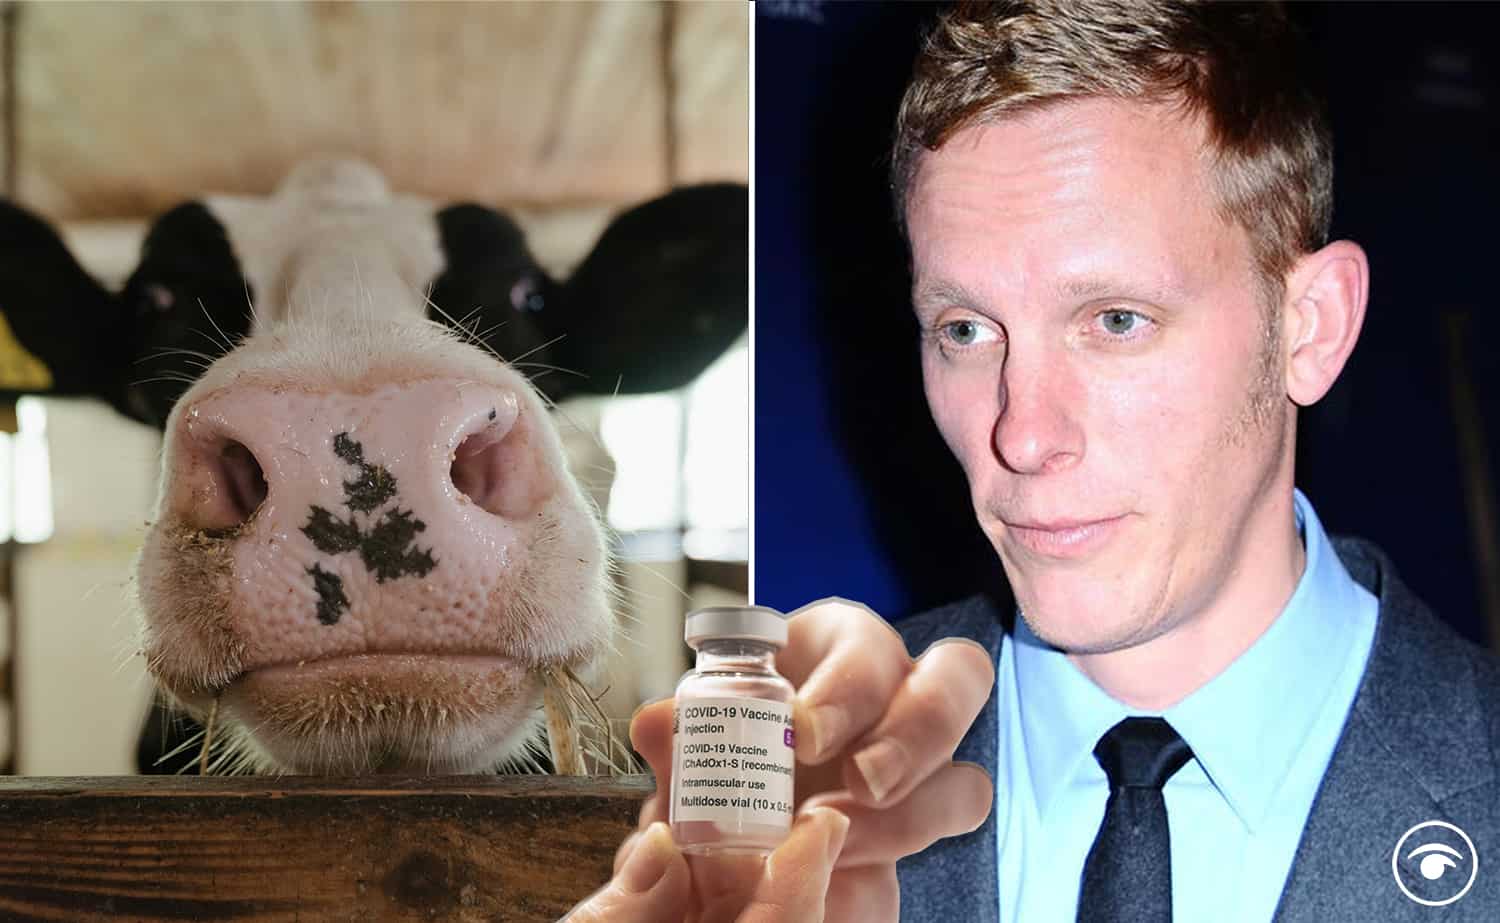 Anti-vaxxers pretend to be vegan to avoid getting jabbed